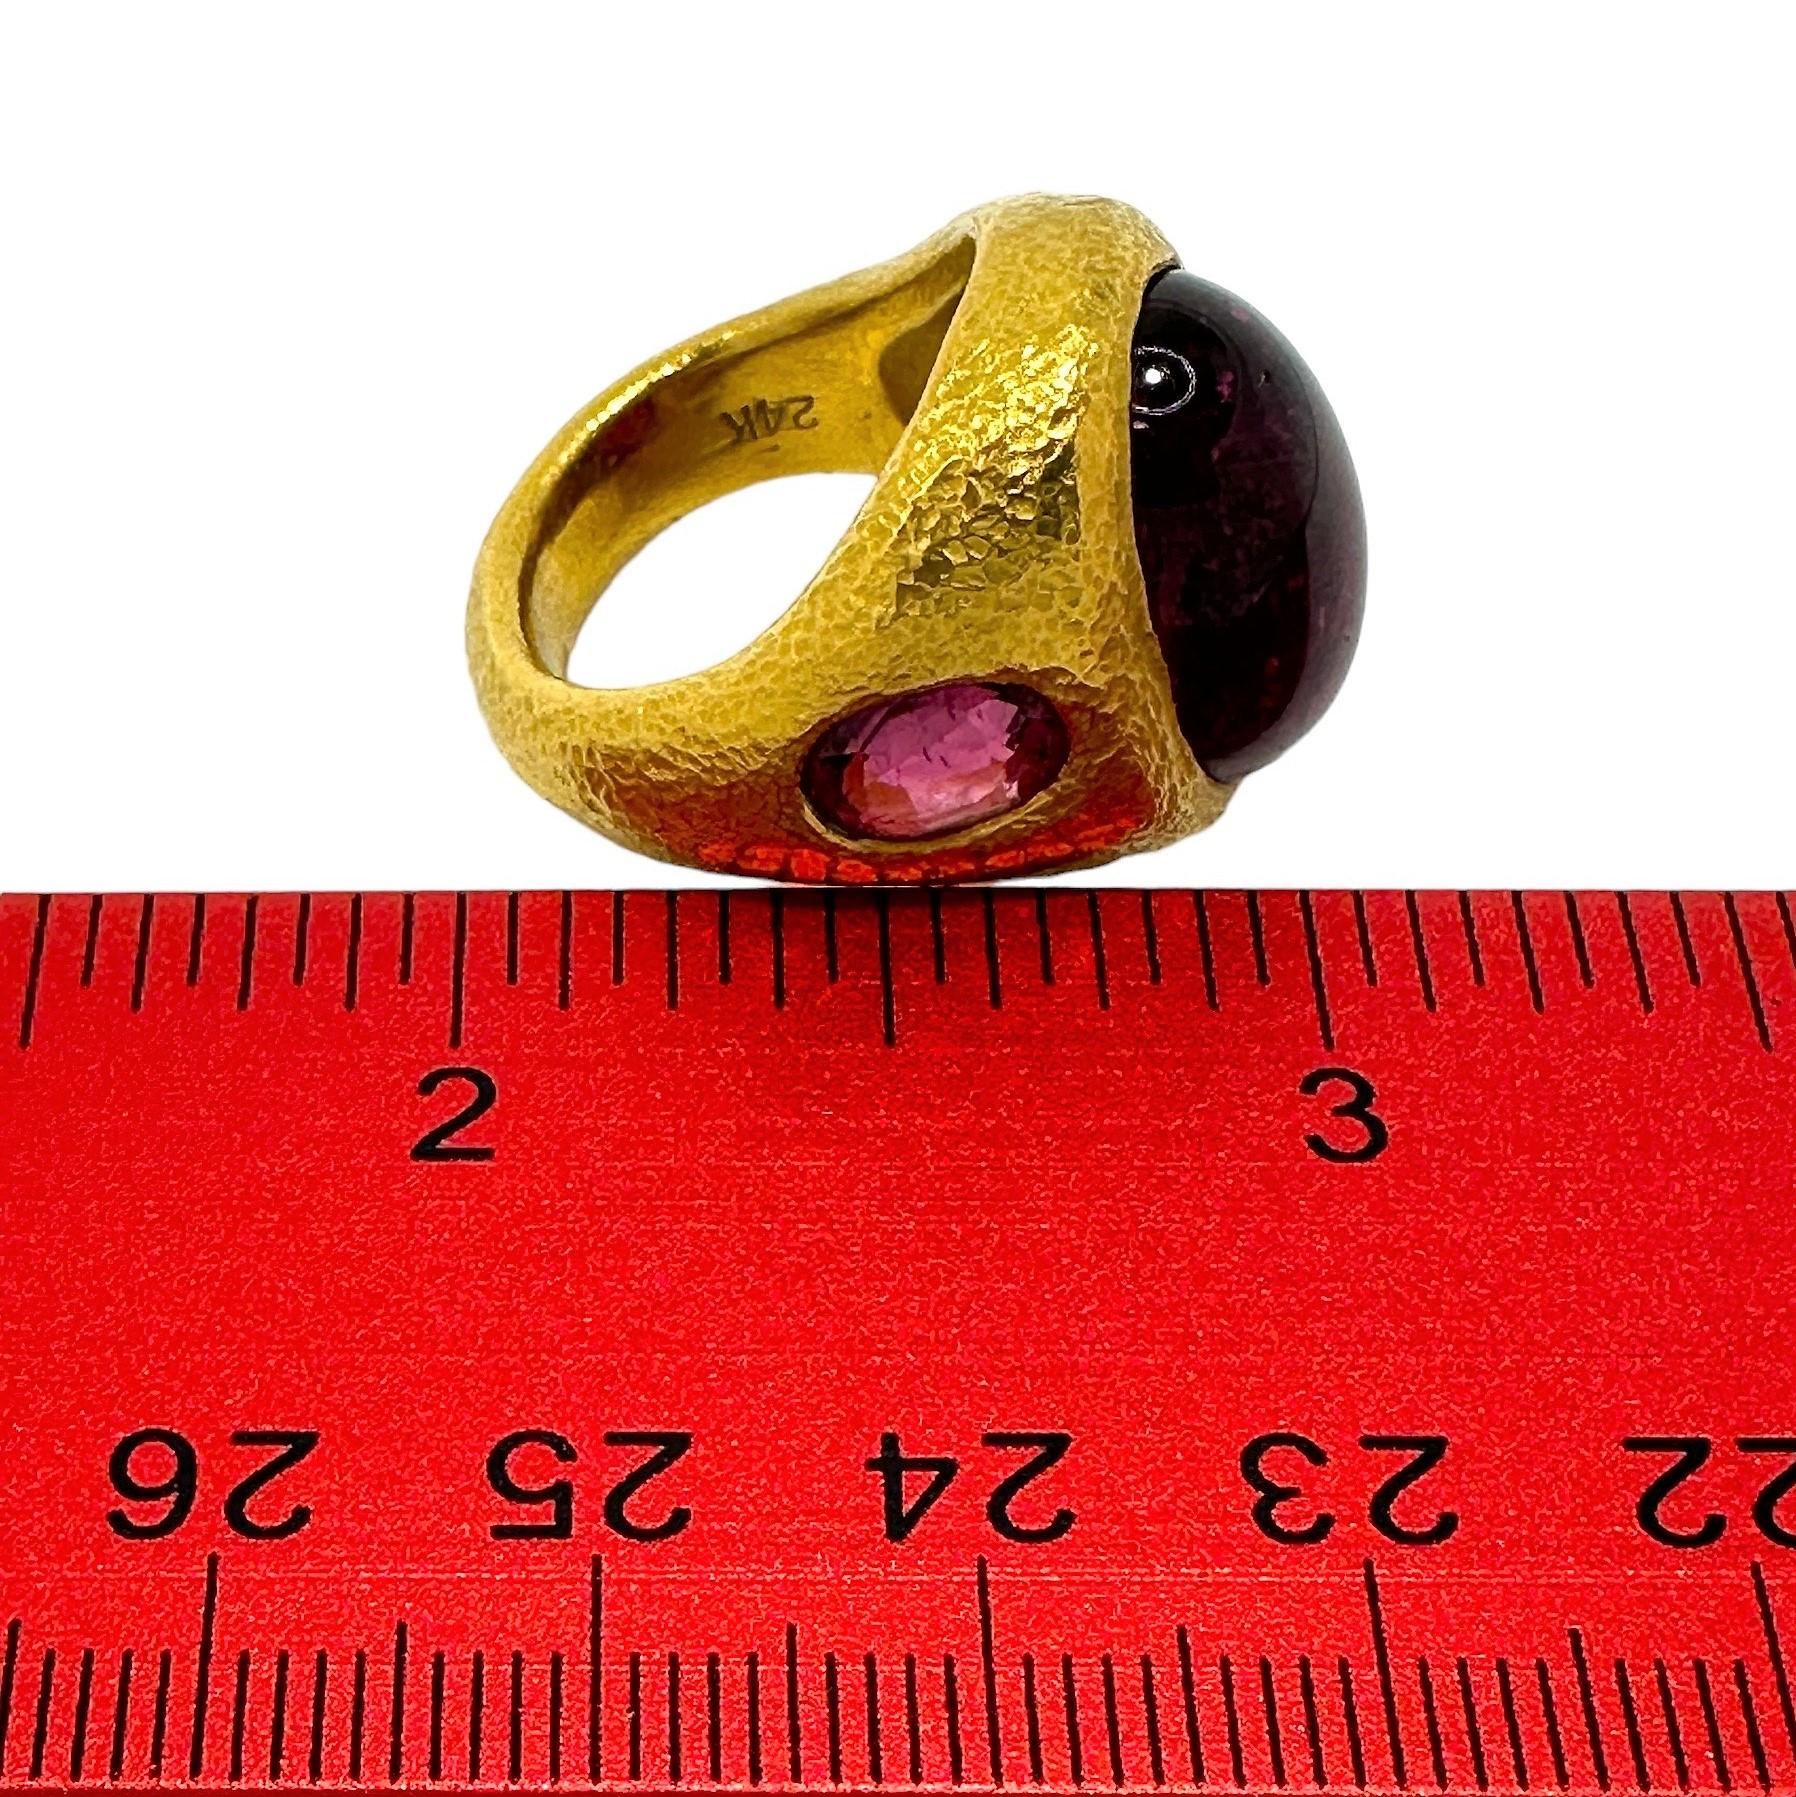 Vintage 24k Gold Hammered Finish Ring with Rubellite Tourmalines by Pisani 4